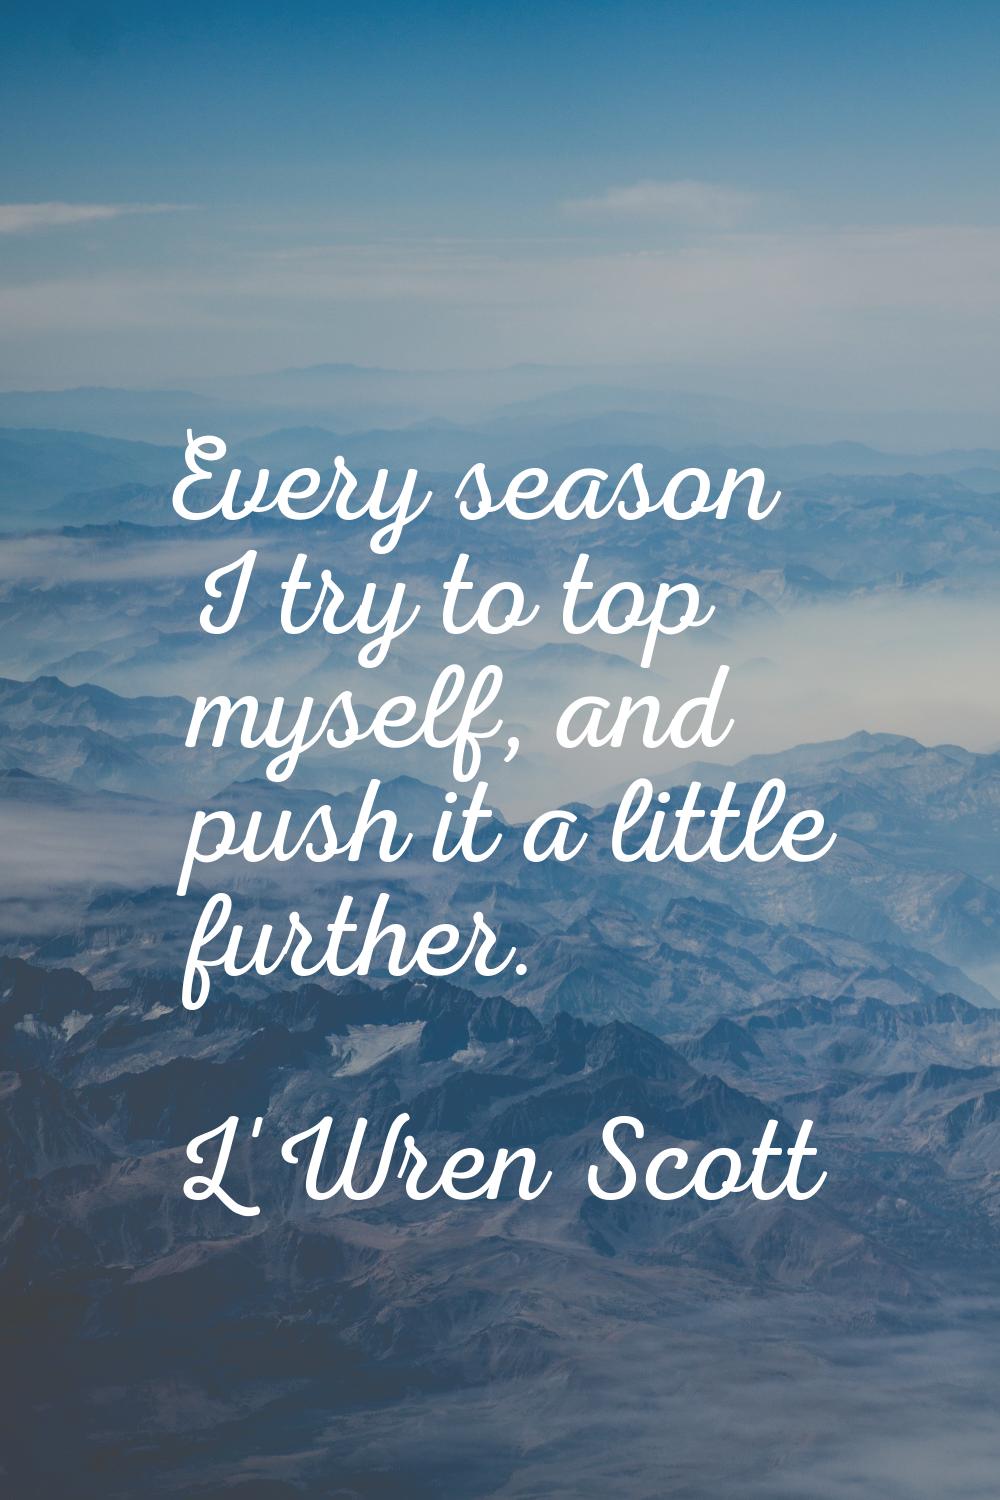 Every season I try to top myself, and push it a little further.